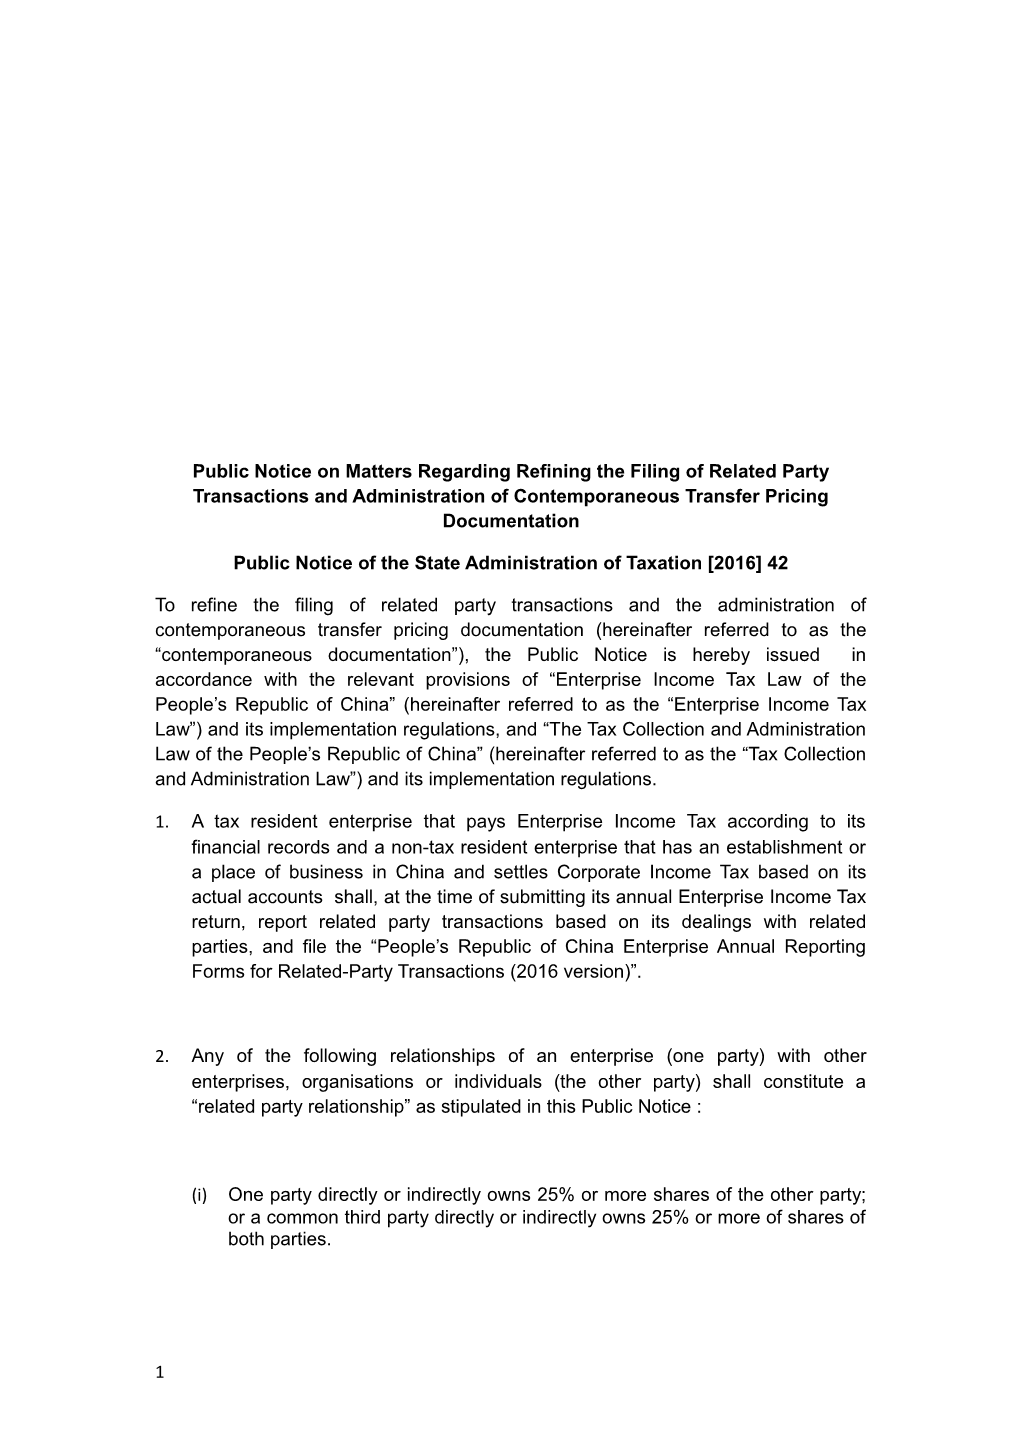 Public Notice of the State Administration of Taxation 2016 42